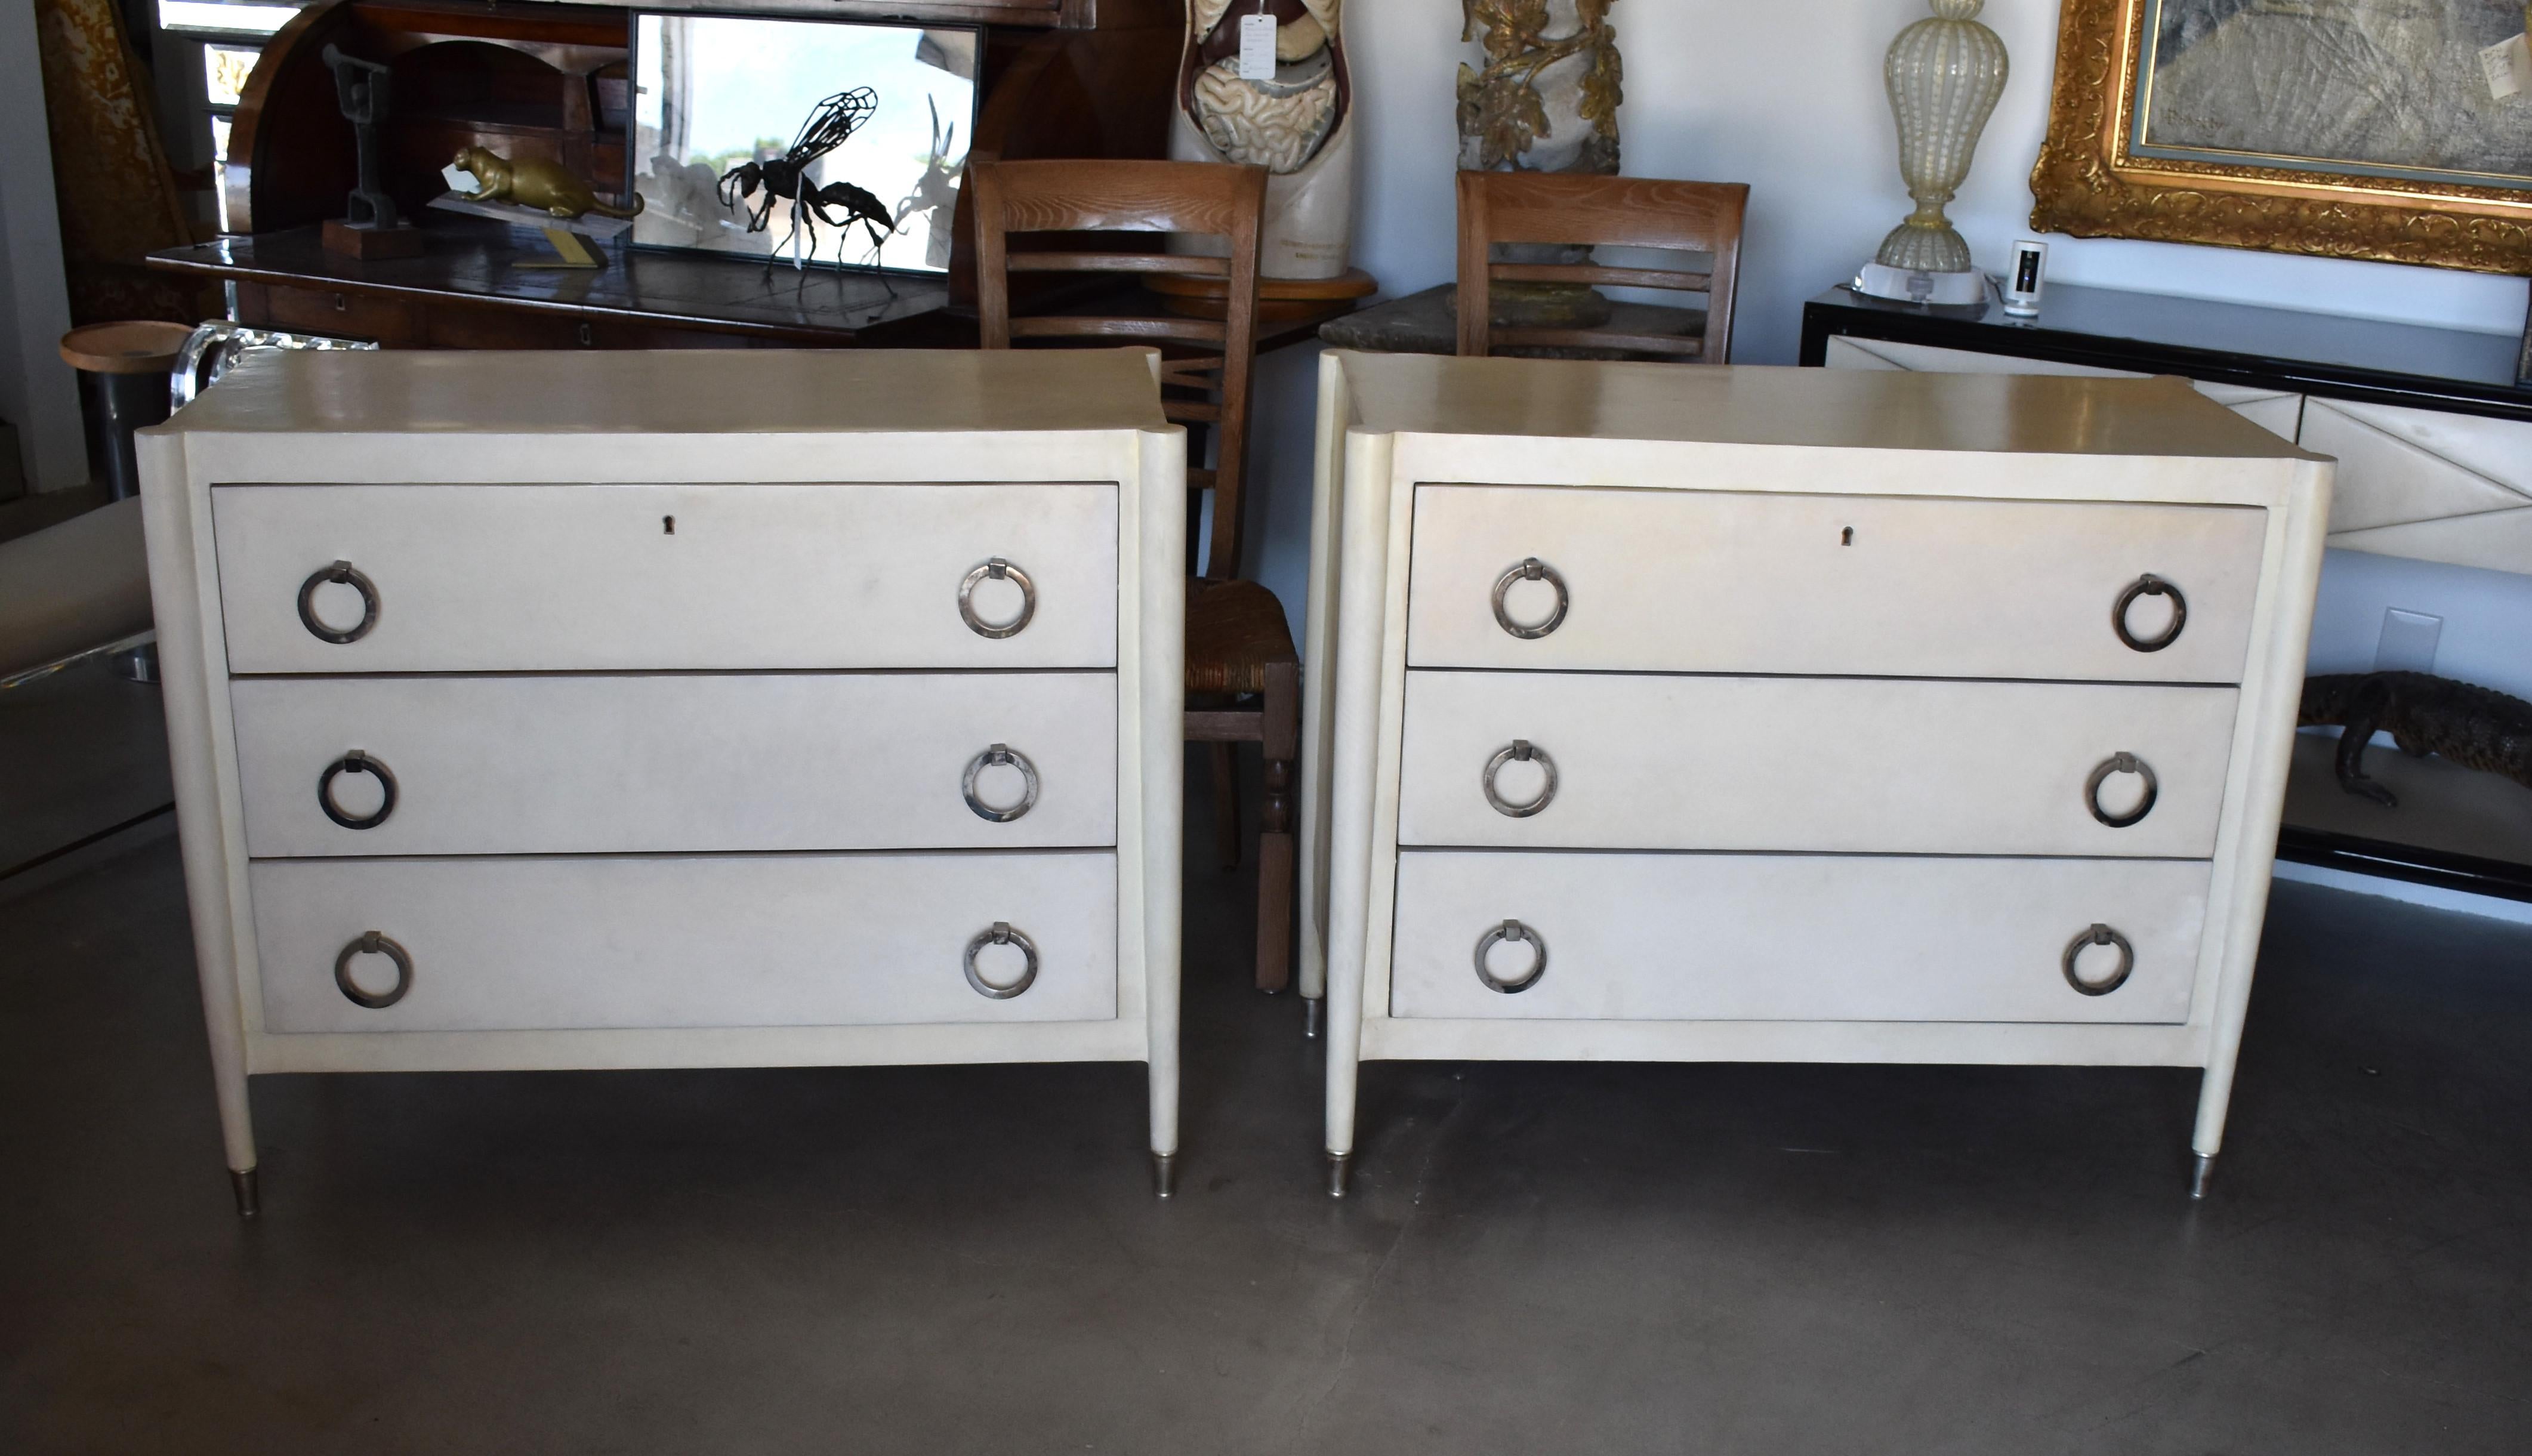 Pair of commodes or nightstands covered with natural goatskin. Each chest has three drawers (no key).

Color of parchment: Natural and light beige vintage look.